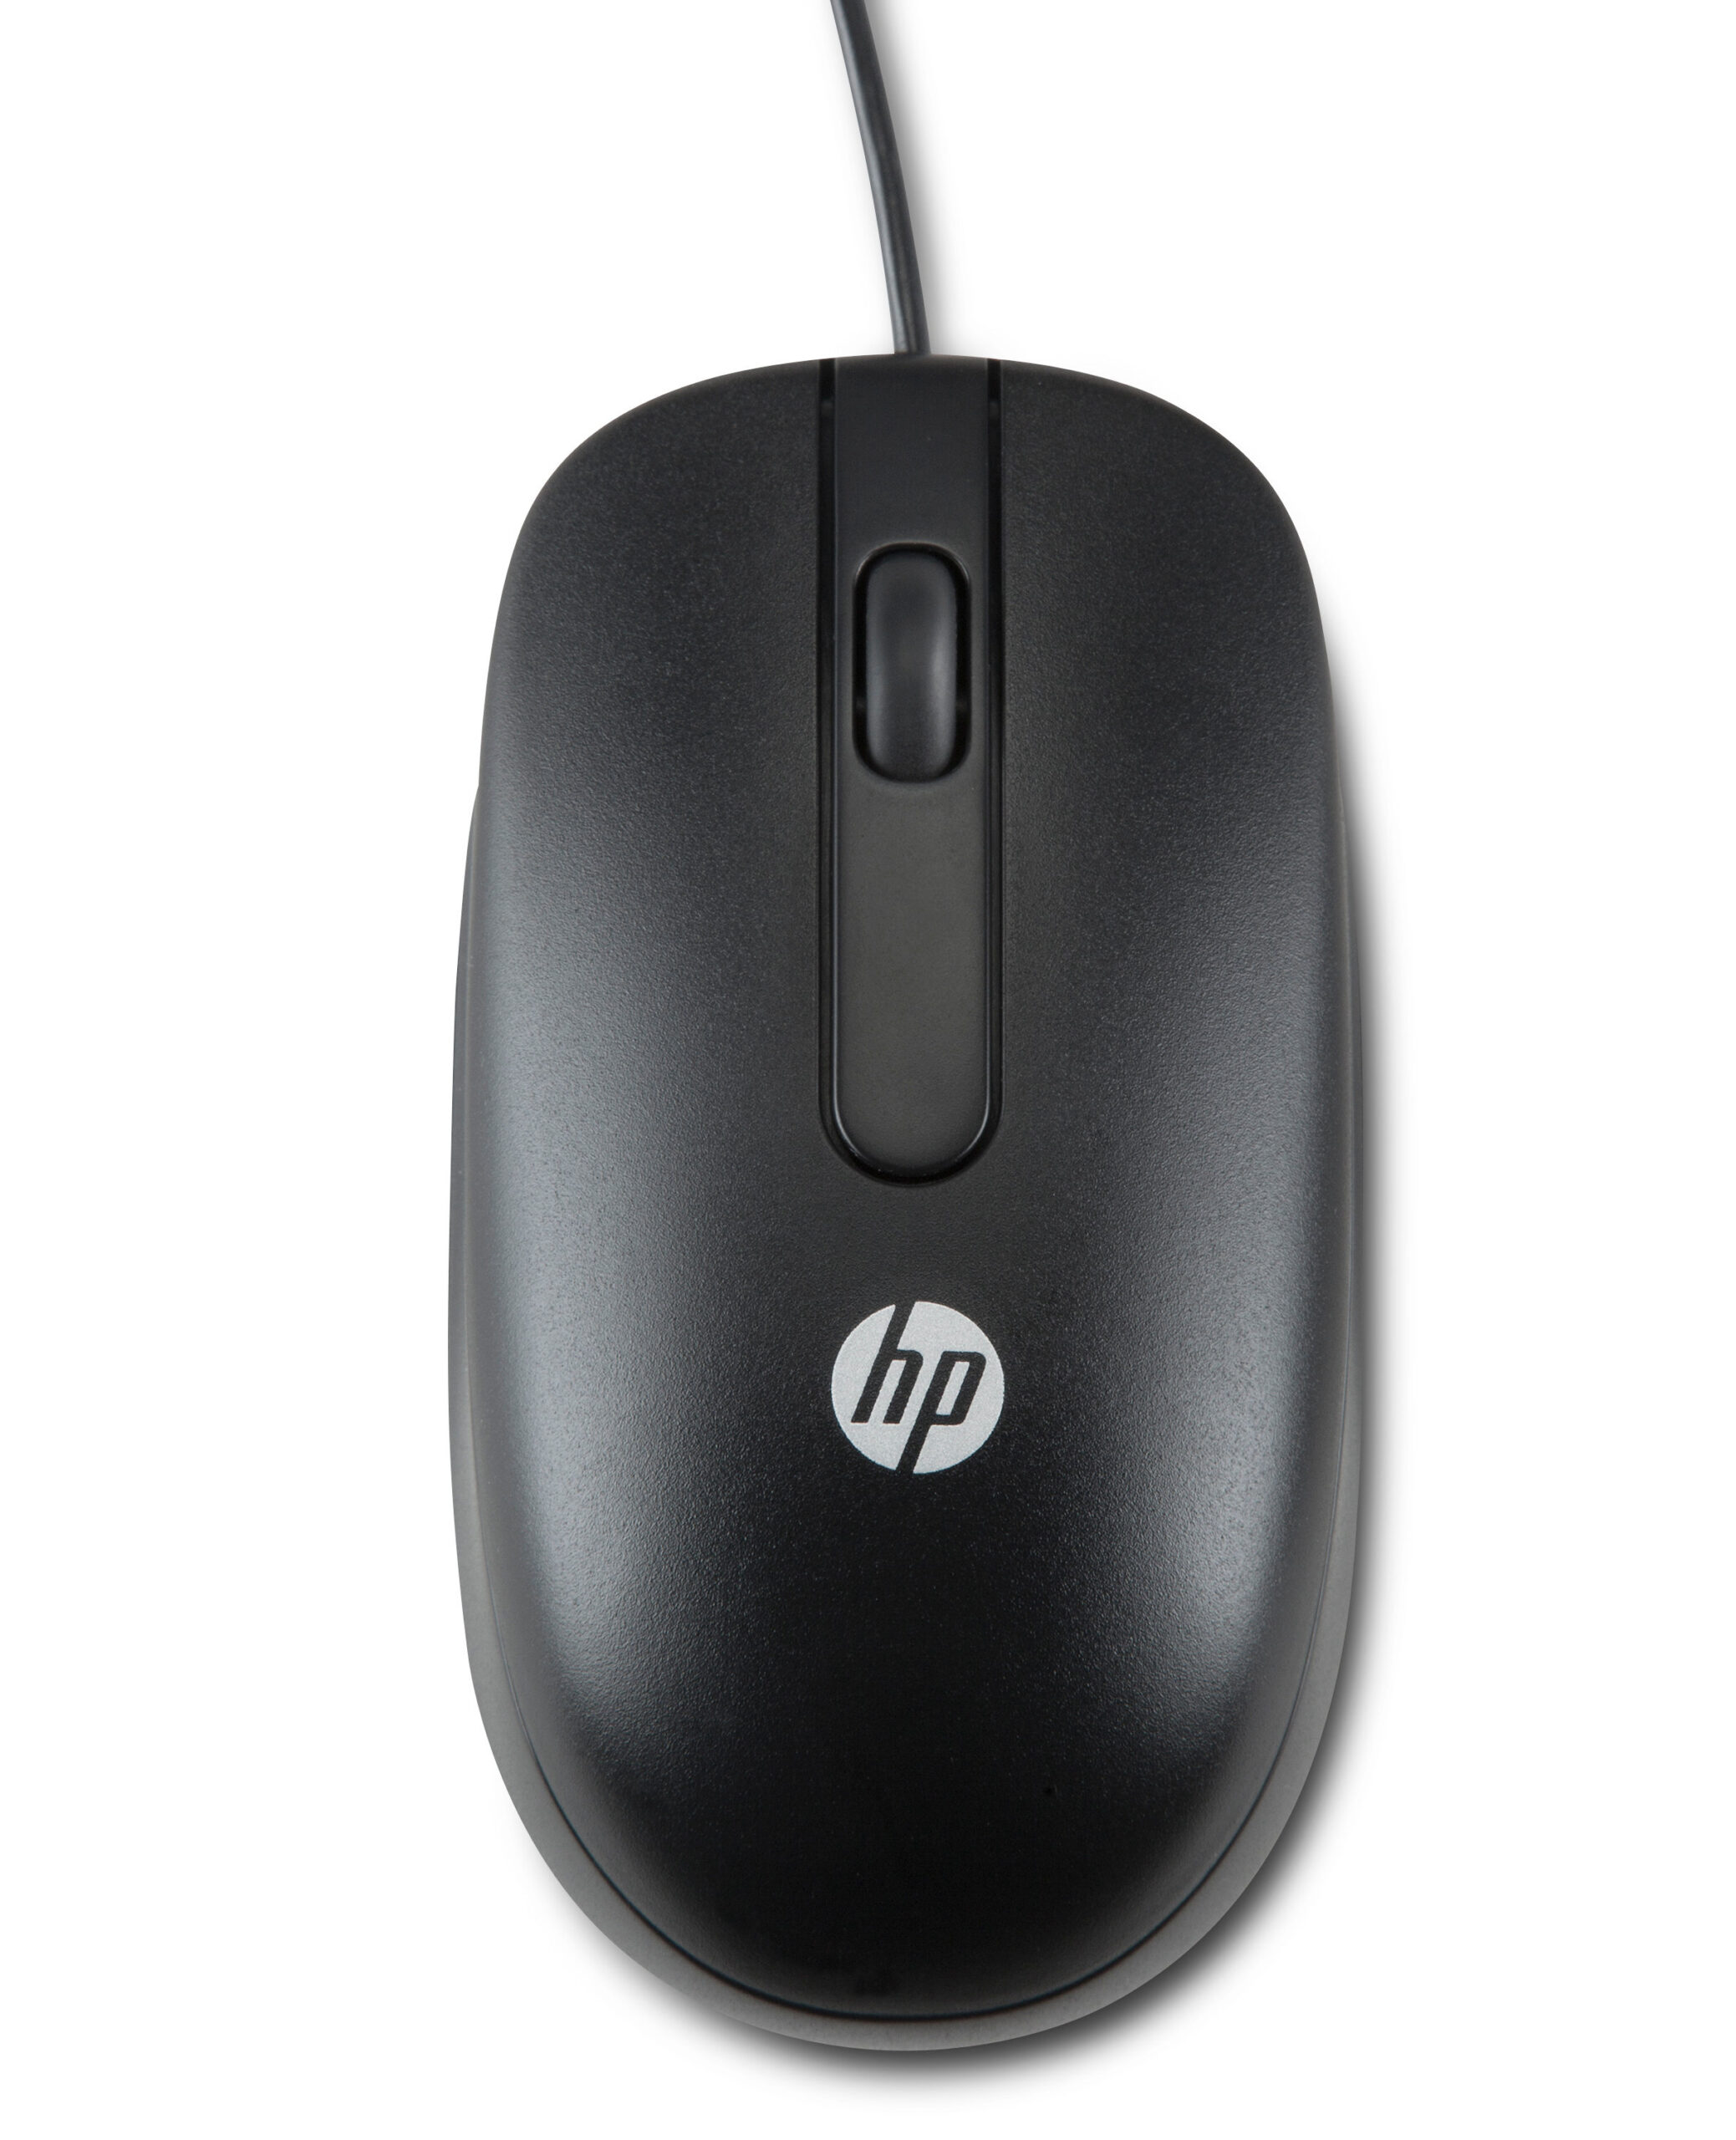 Hp Usb 1000 Dpi Laser Mouse Hp Comm Pc Accs Top Value 9f Qy778at 887111162380